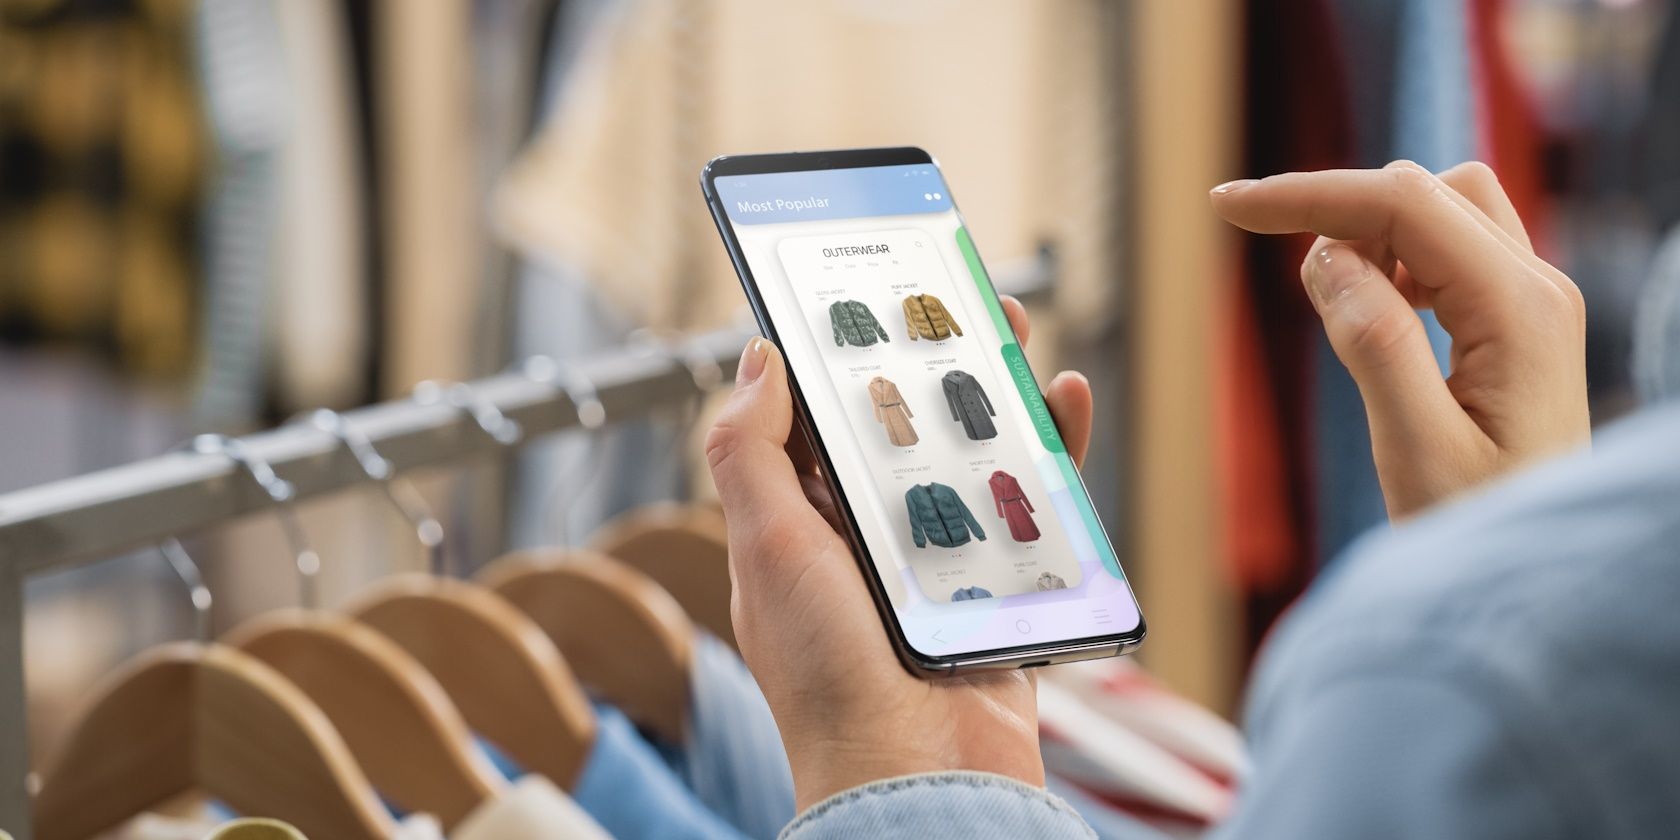 online clothes shopping on mobile phone